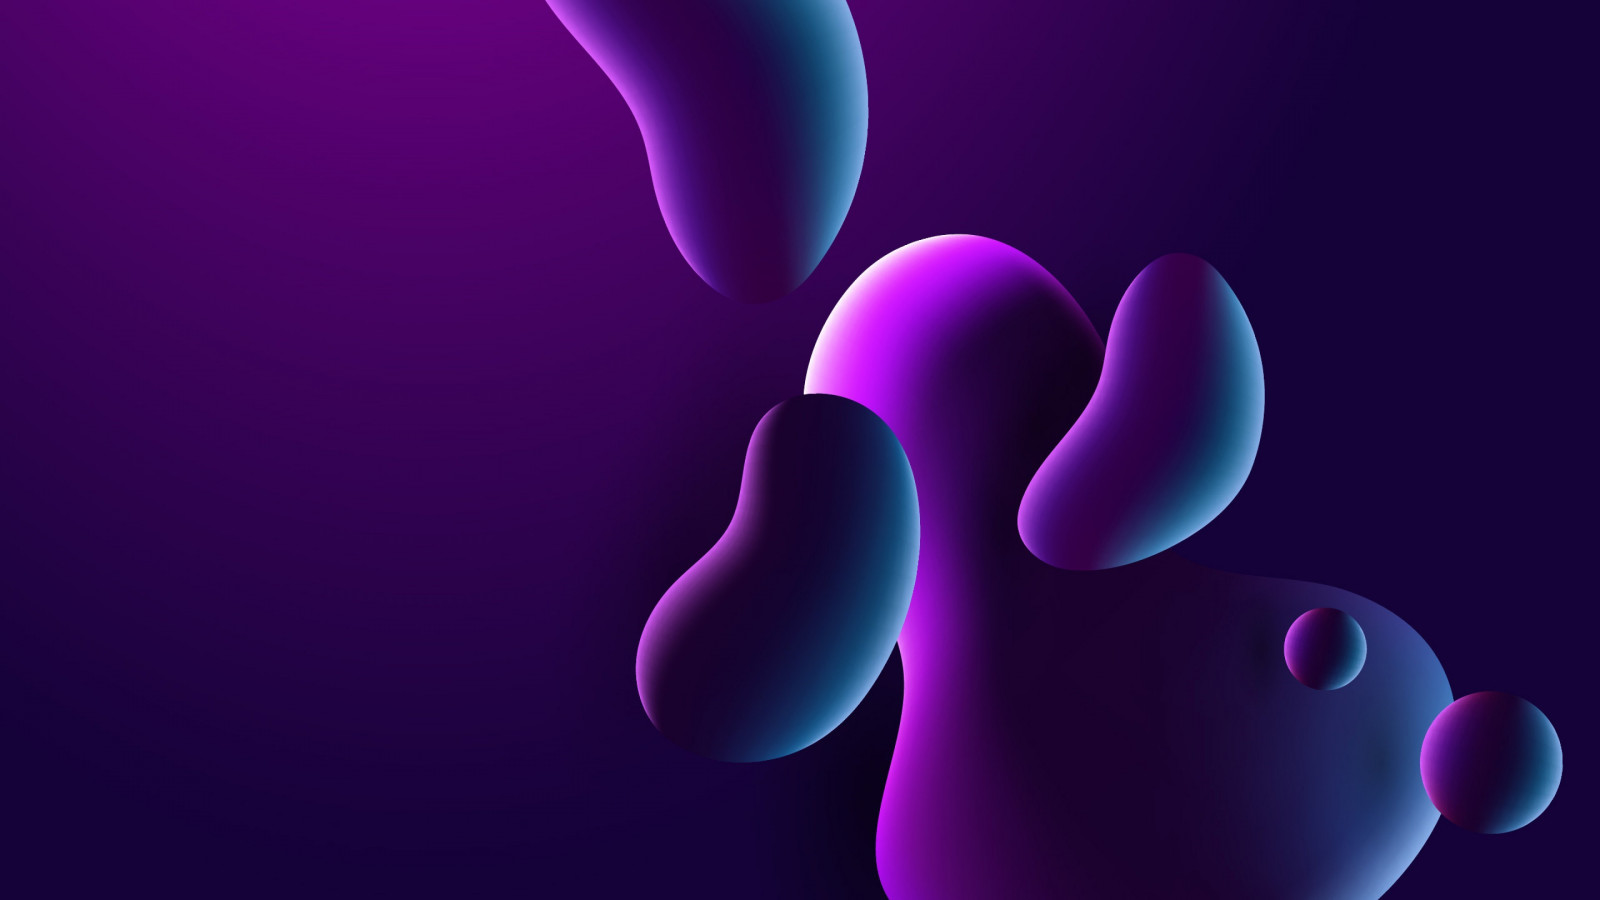 OnePlus 7T Pro, stock, bubble, abstract wallpaper 1600x900